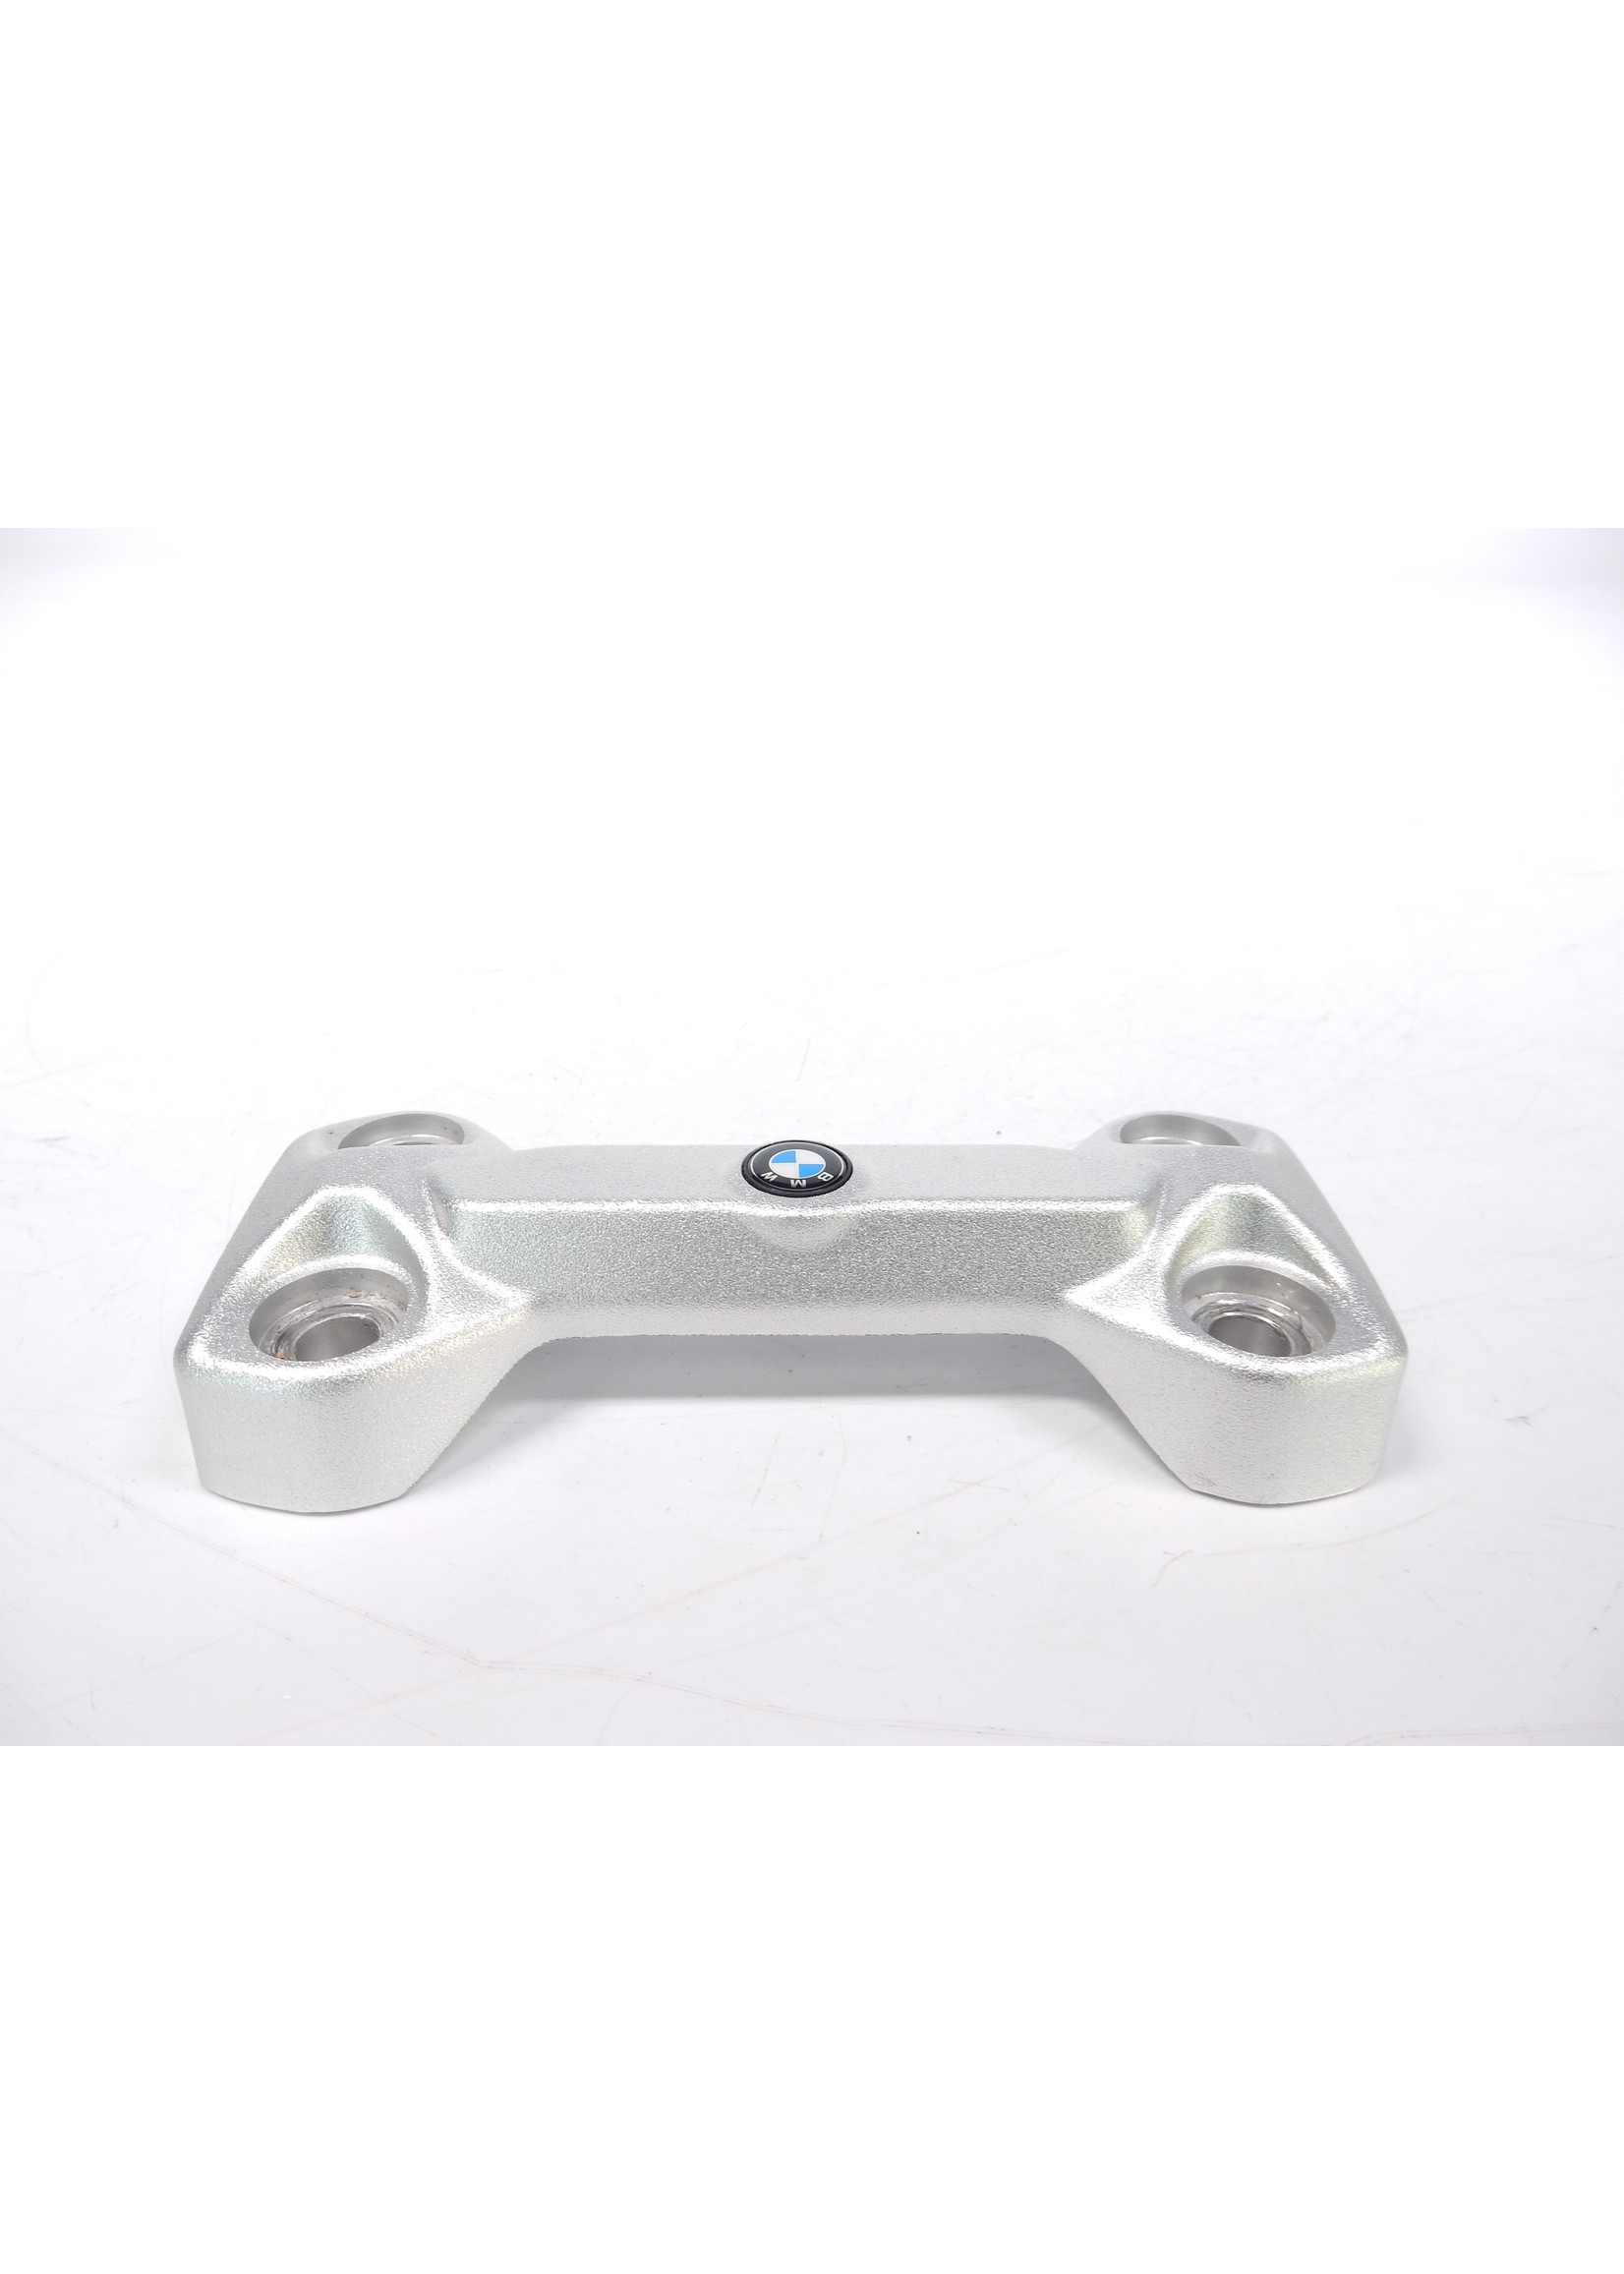 BMW BMW S 1000 R Clamping support, top / 31421600245